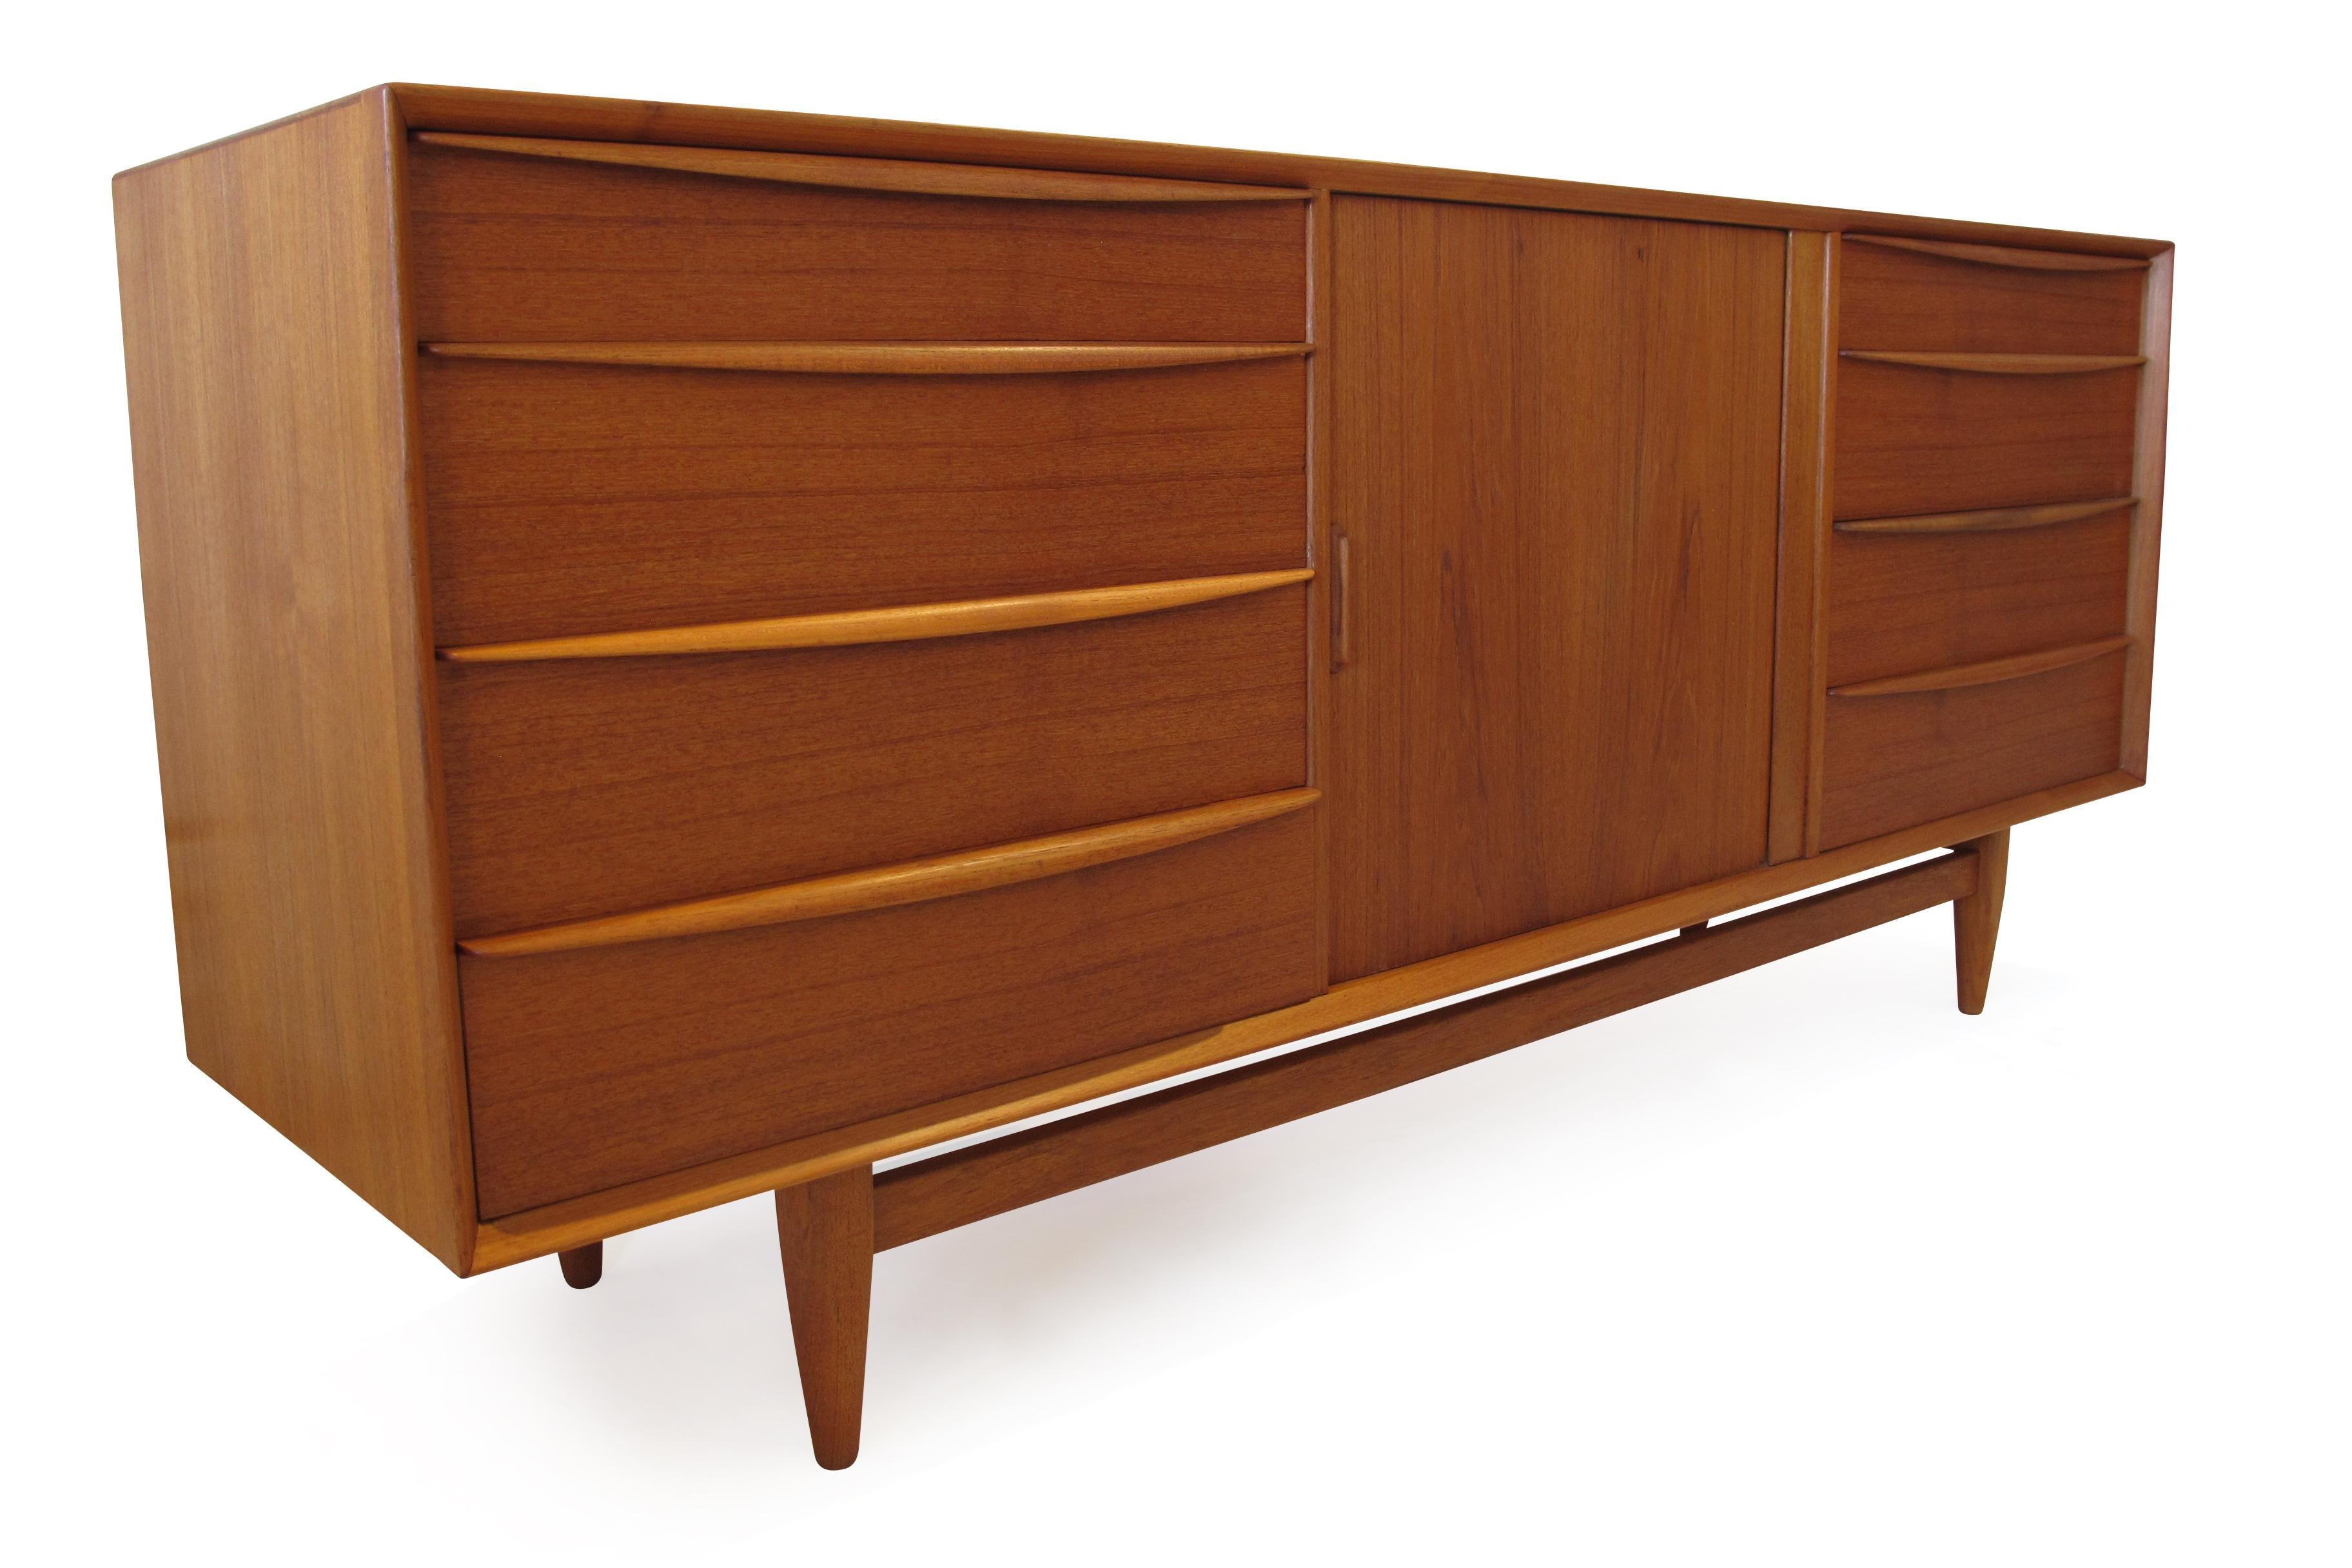 Midcentury teak dresser designed by Svend Age Madsen for Falster Mobelfabrik, Denmark. Crafted of old-growth teak with mitered corners, and raised on round tapered legs. The dresser has a total of 13 drawers. The left and right sides features four